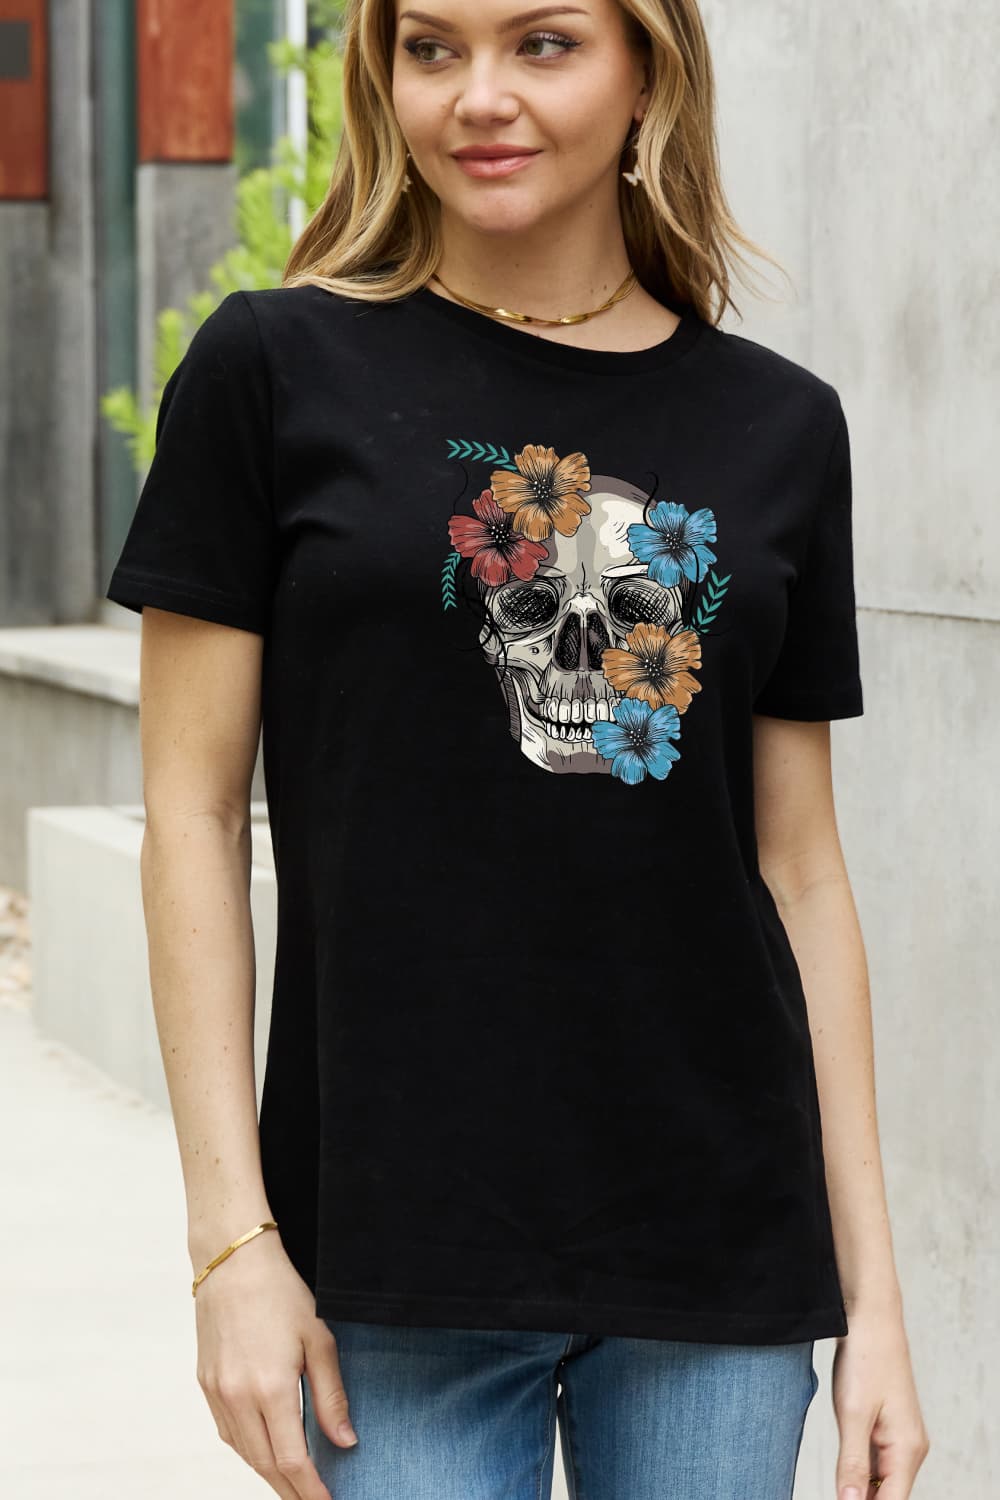 Full Size Flower Skull Graphic Cotton Tee - Black / S - T-Shirts - Shirts & Tops - 8 - 2024